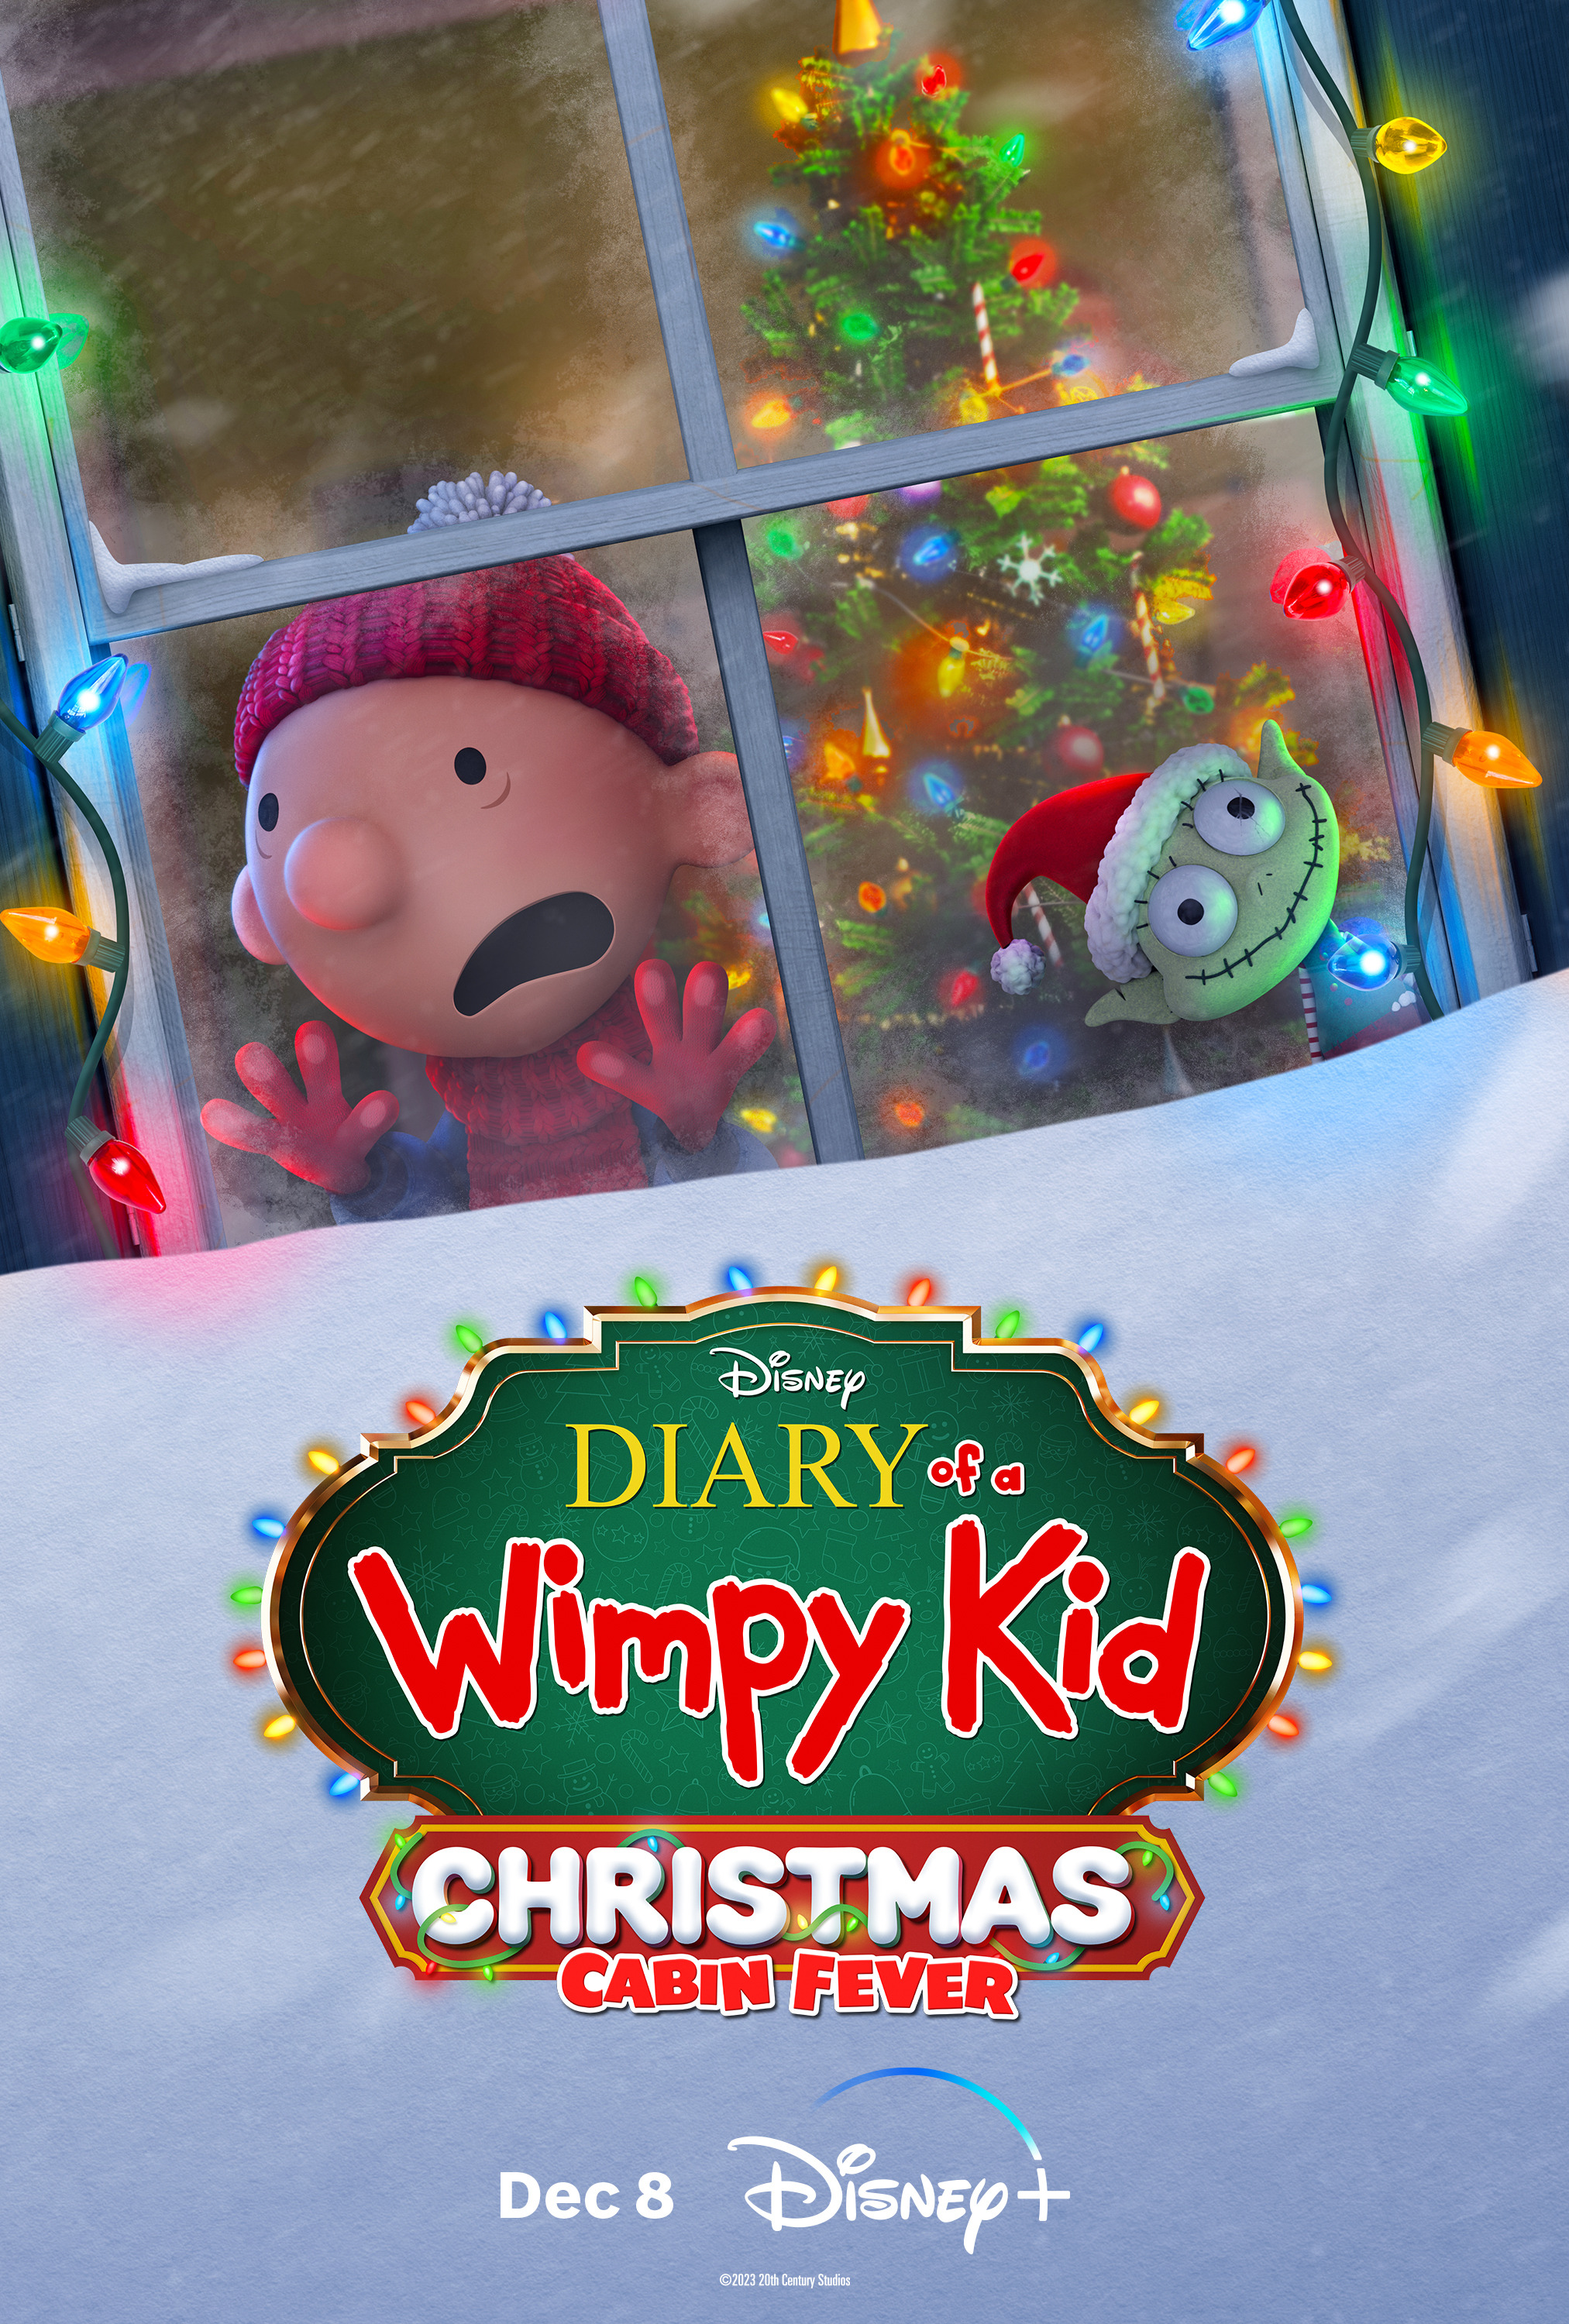 Mega Sized Movie Poster Image for Diary of a Wimpy Kid Christmas: Cabin Fever (#2 of 5)